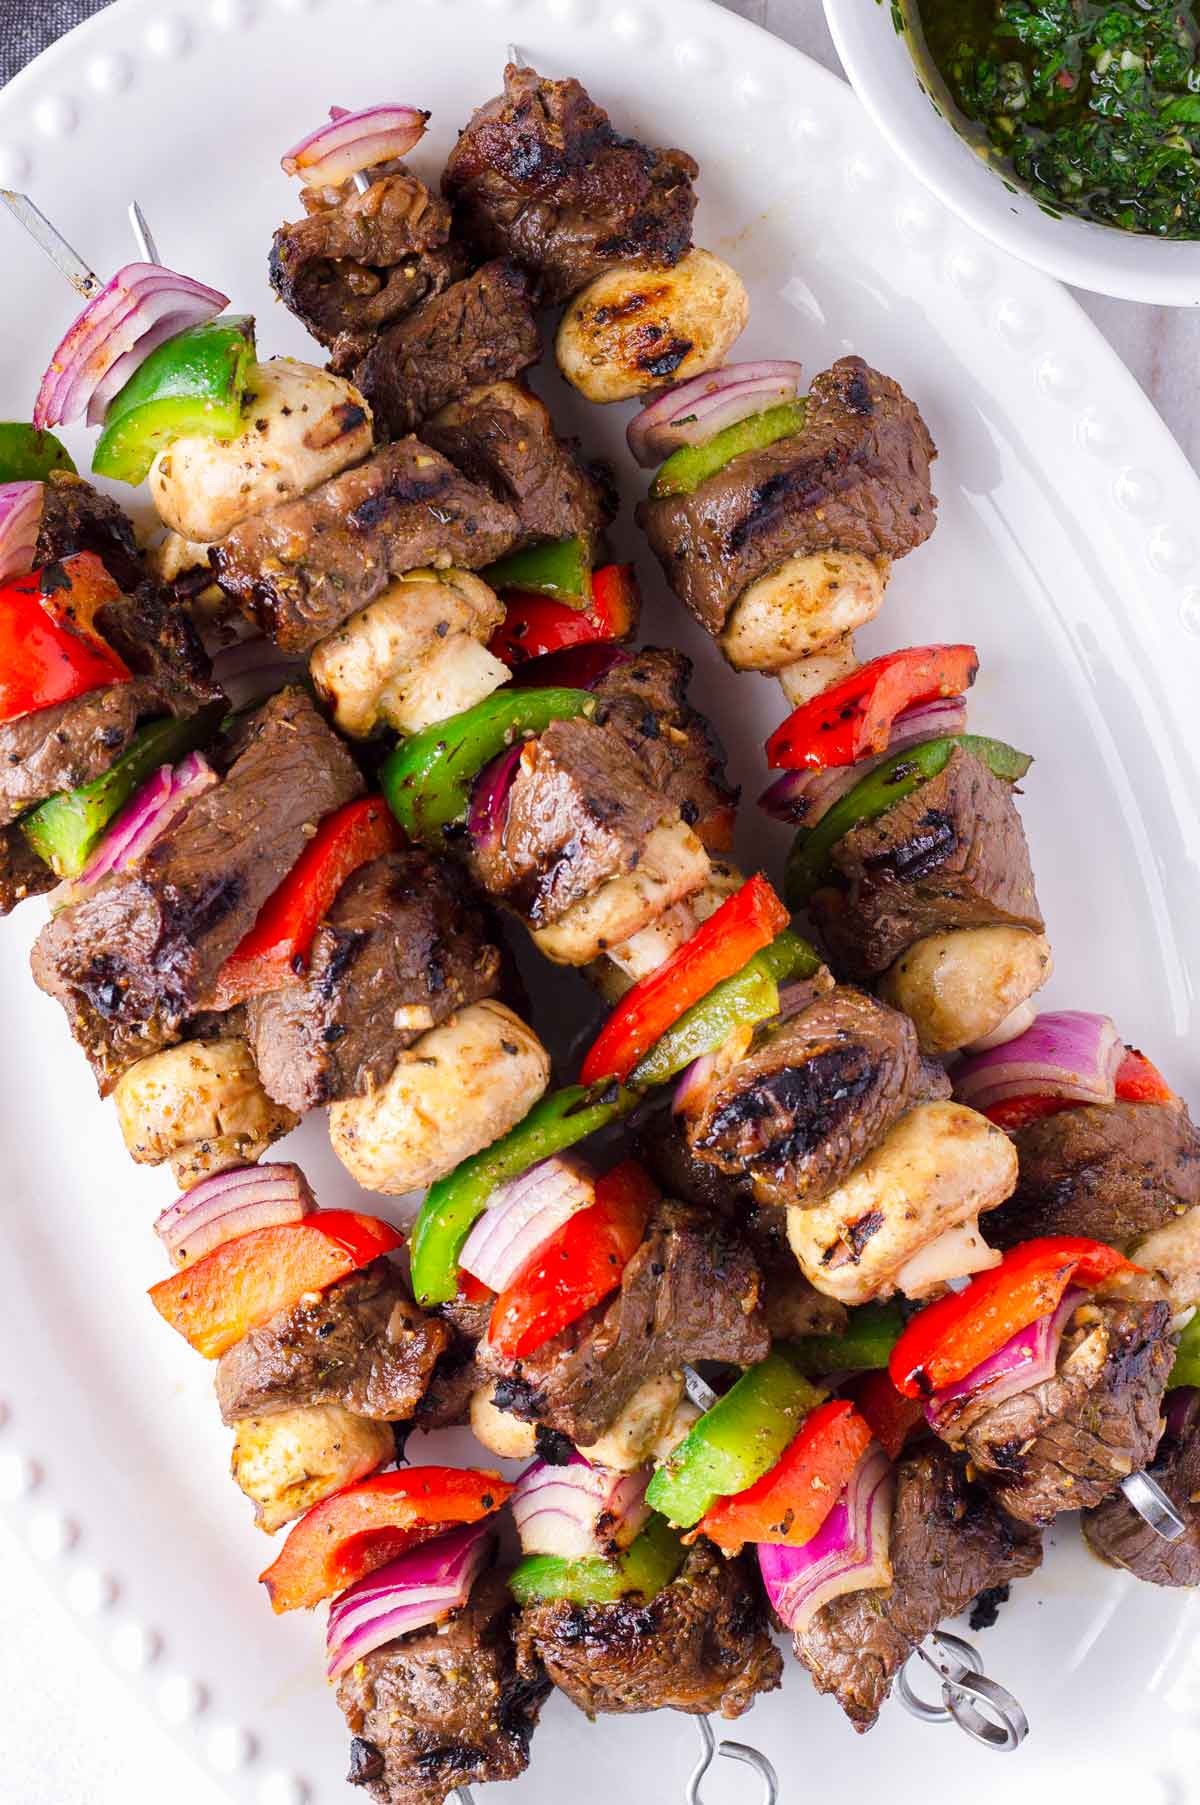 top view of assembled and grille beef kabobs with veggies